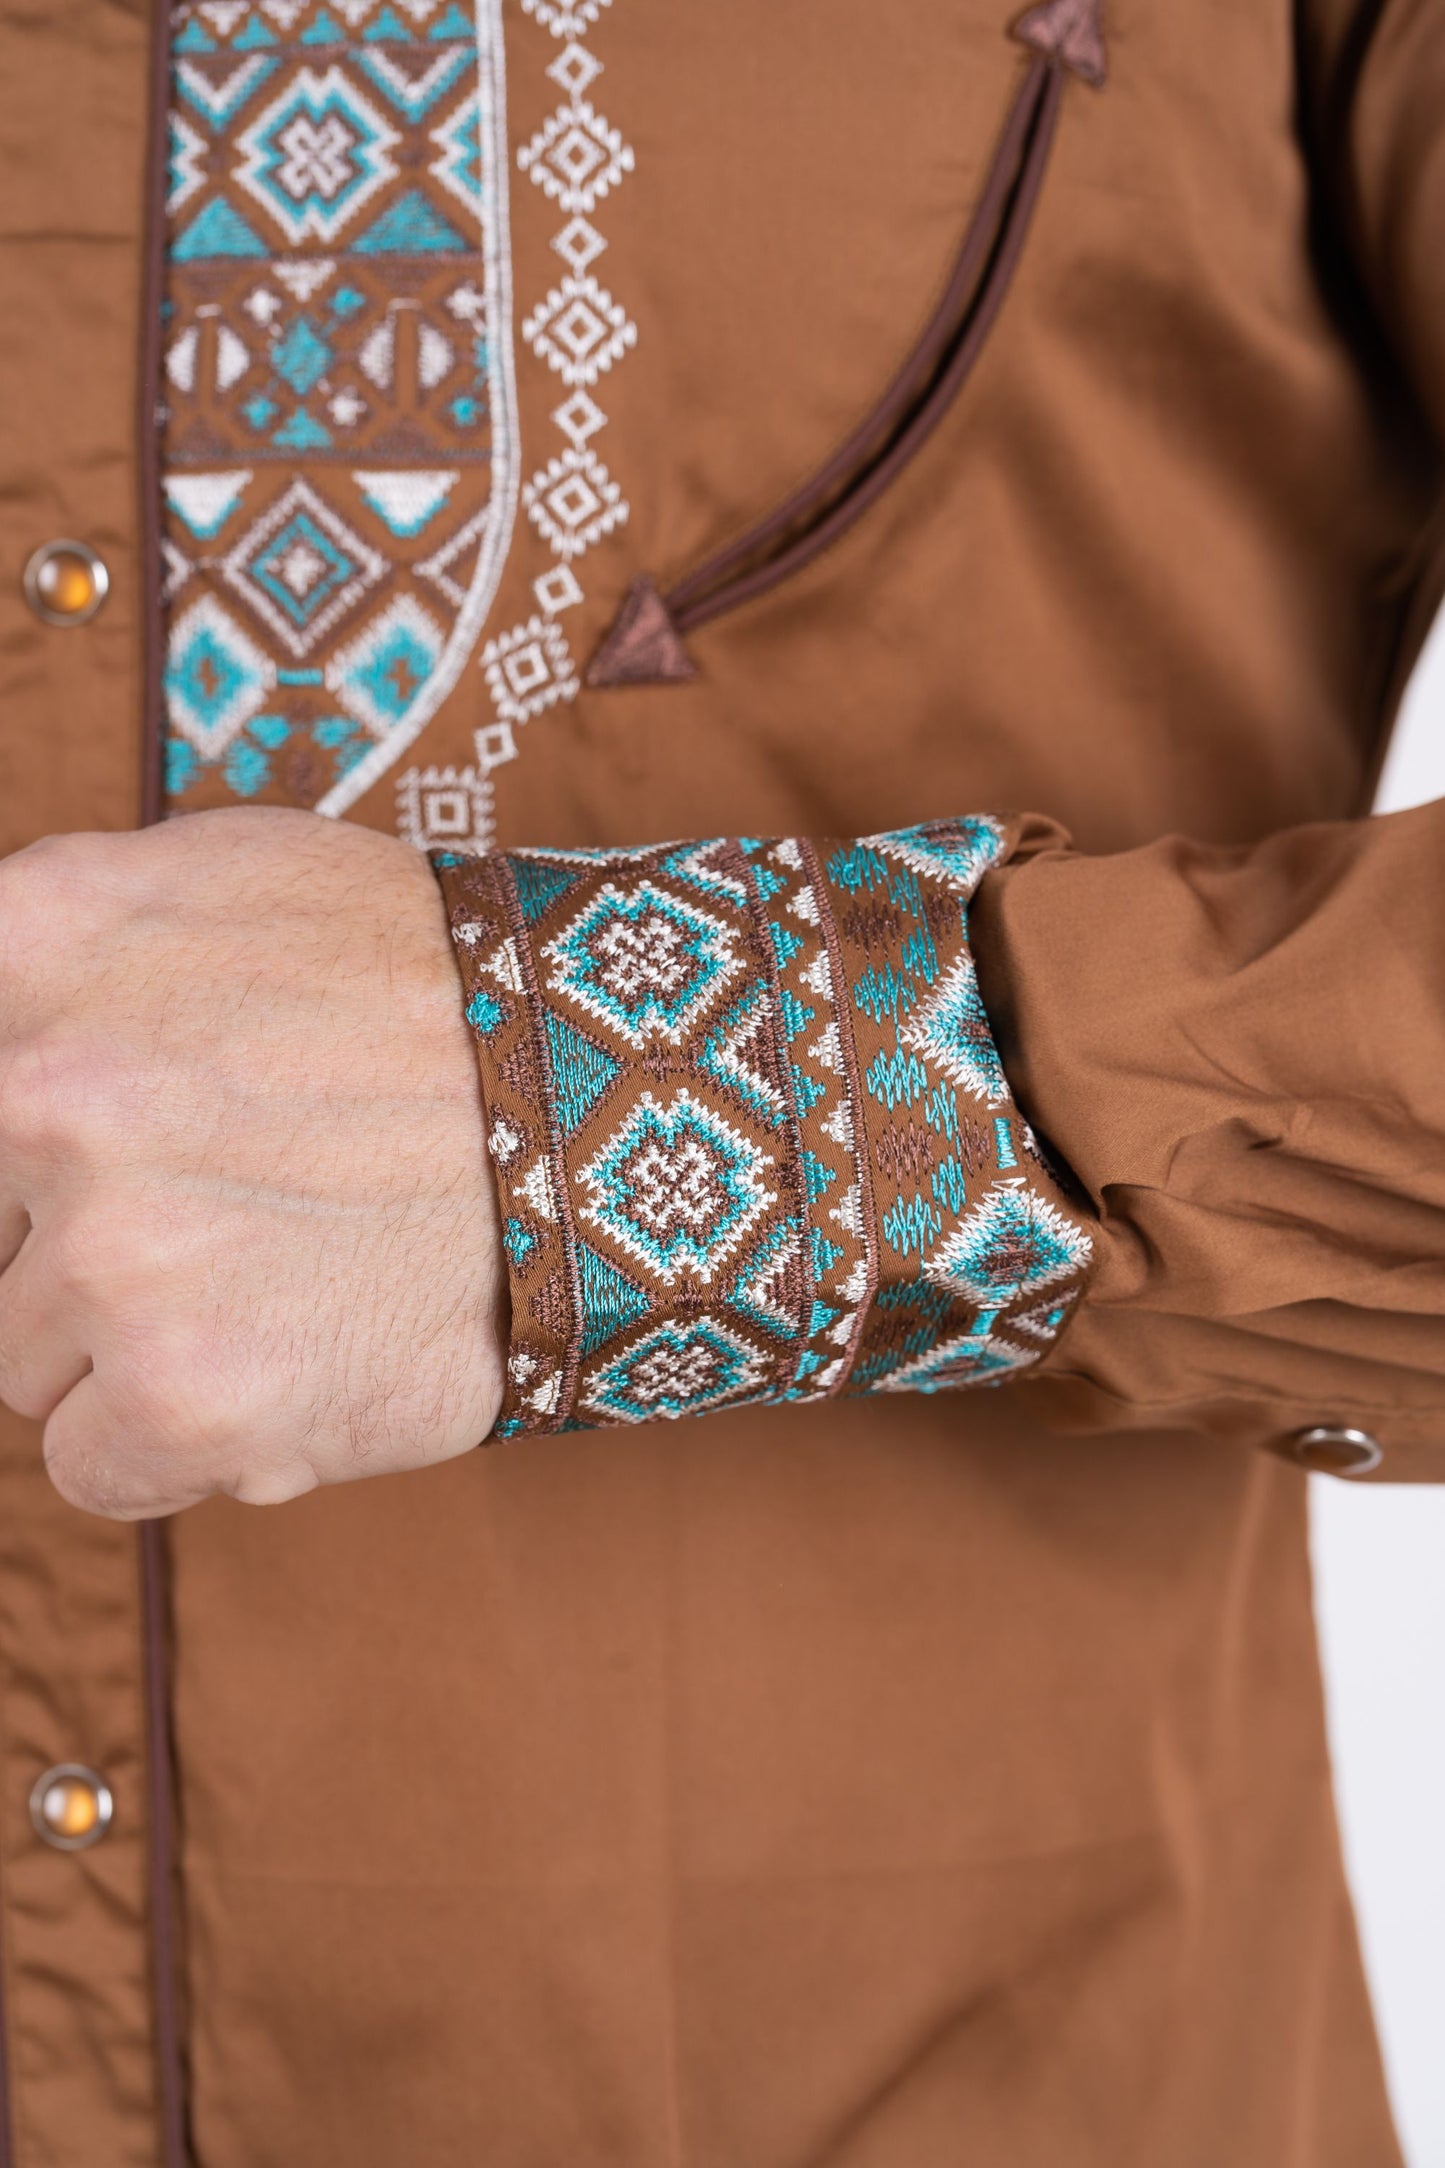 Men's Cotton Camel Embroidery Western Shirt